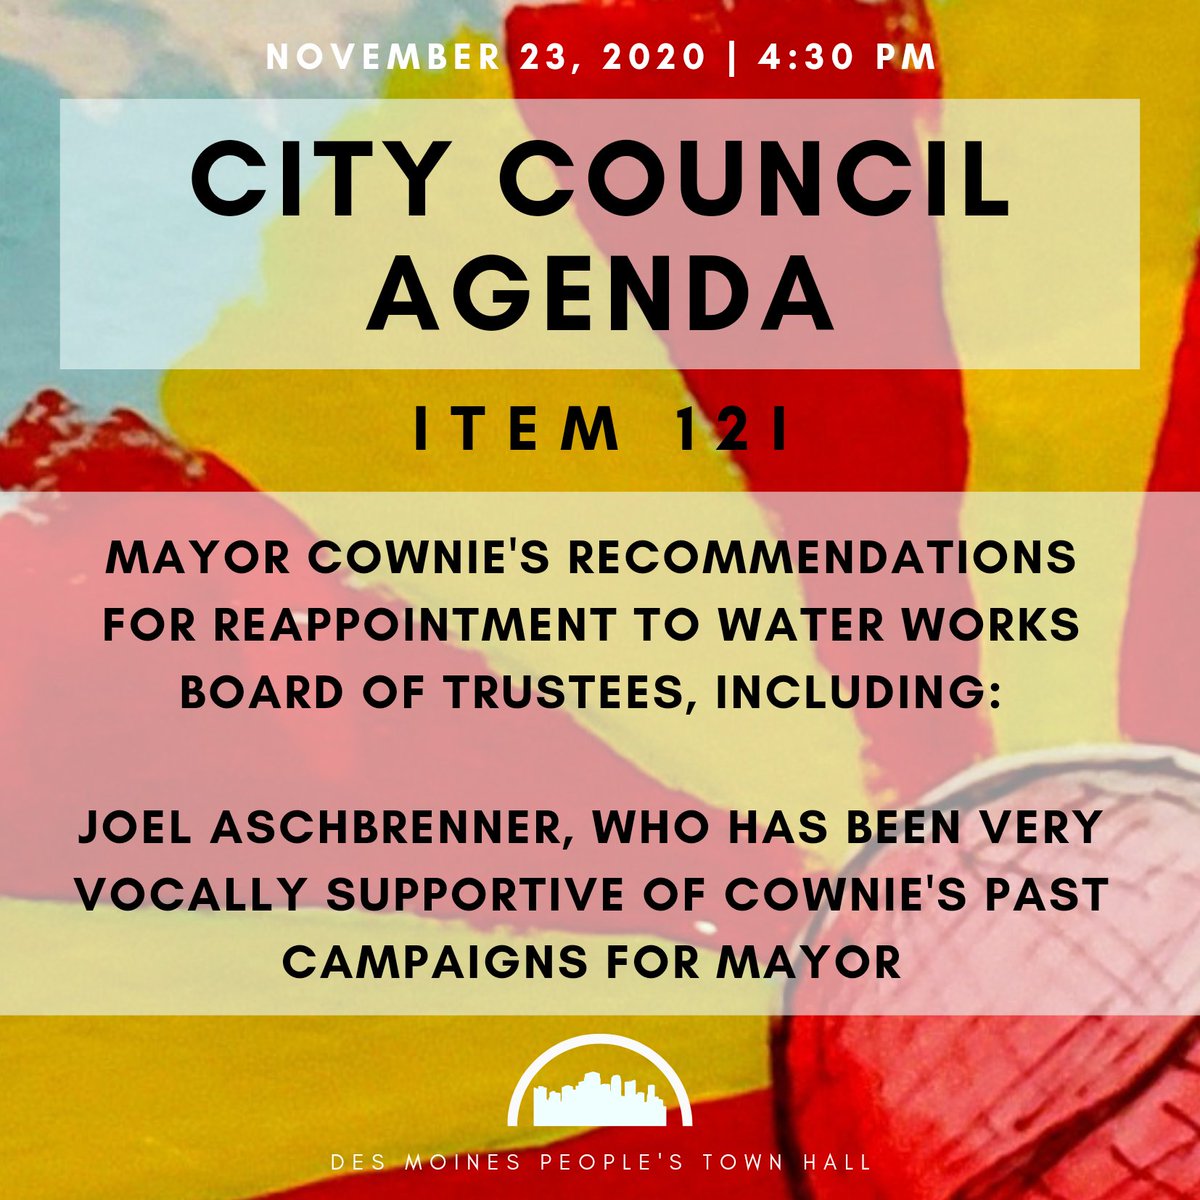 First up, Consent Agenda, and a softball. Mayor Cownie is recommending reappointment of a fan of his to the Water Works Board of Trustees for the 2020-2027 Term